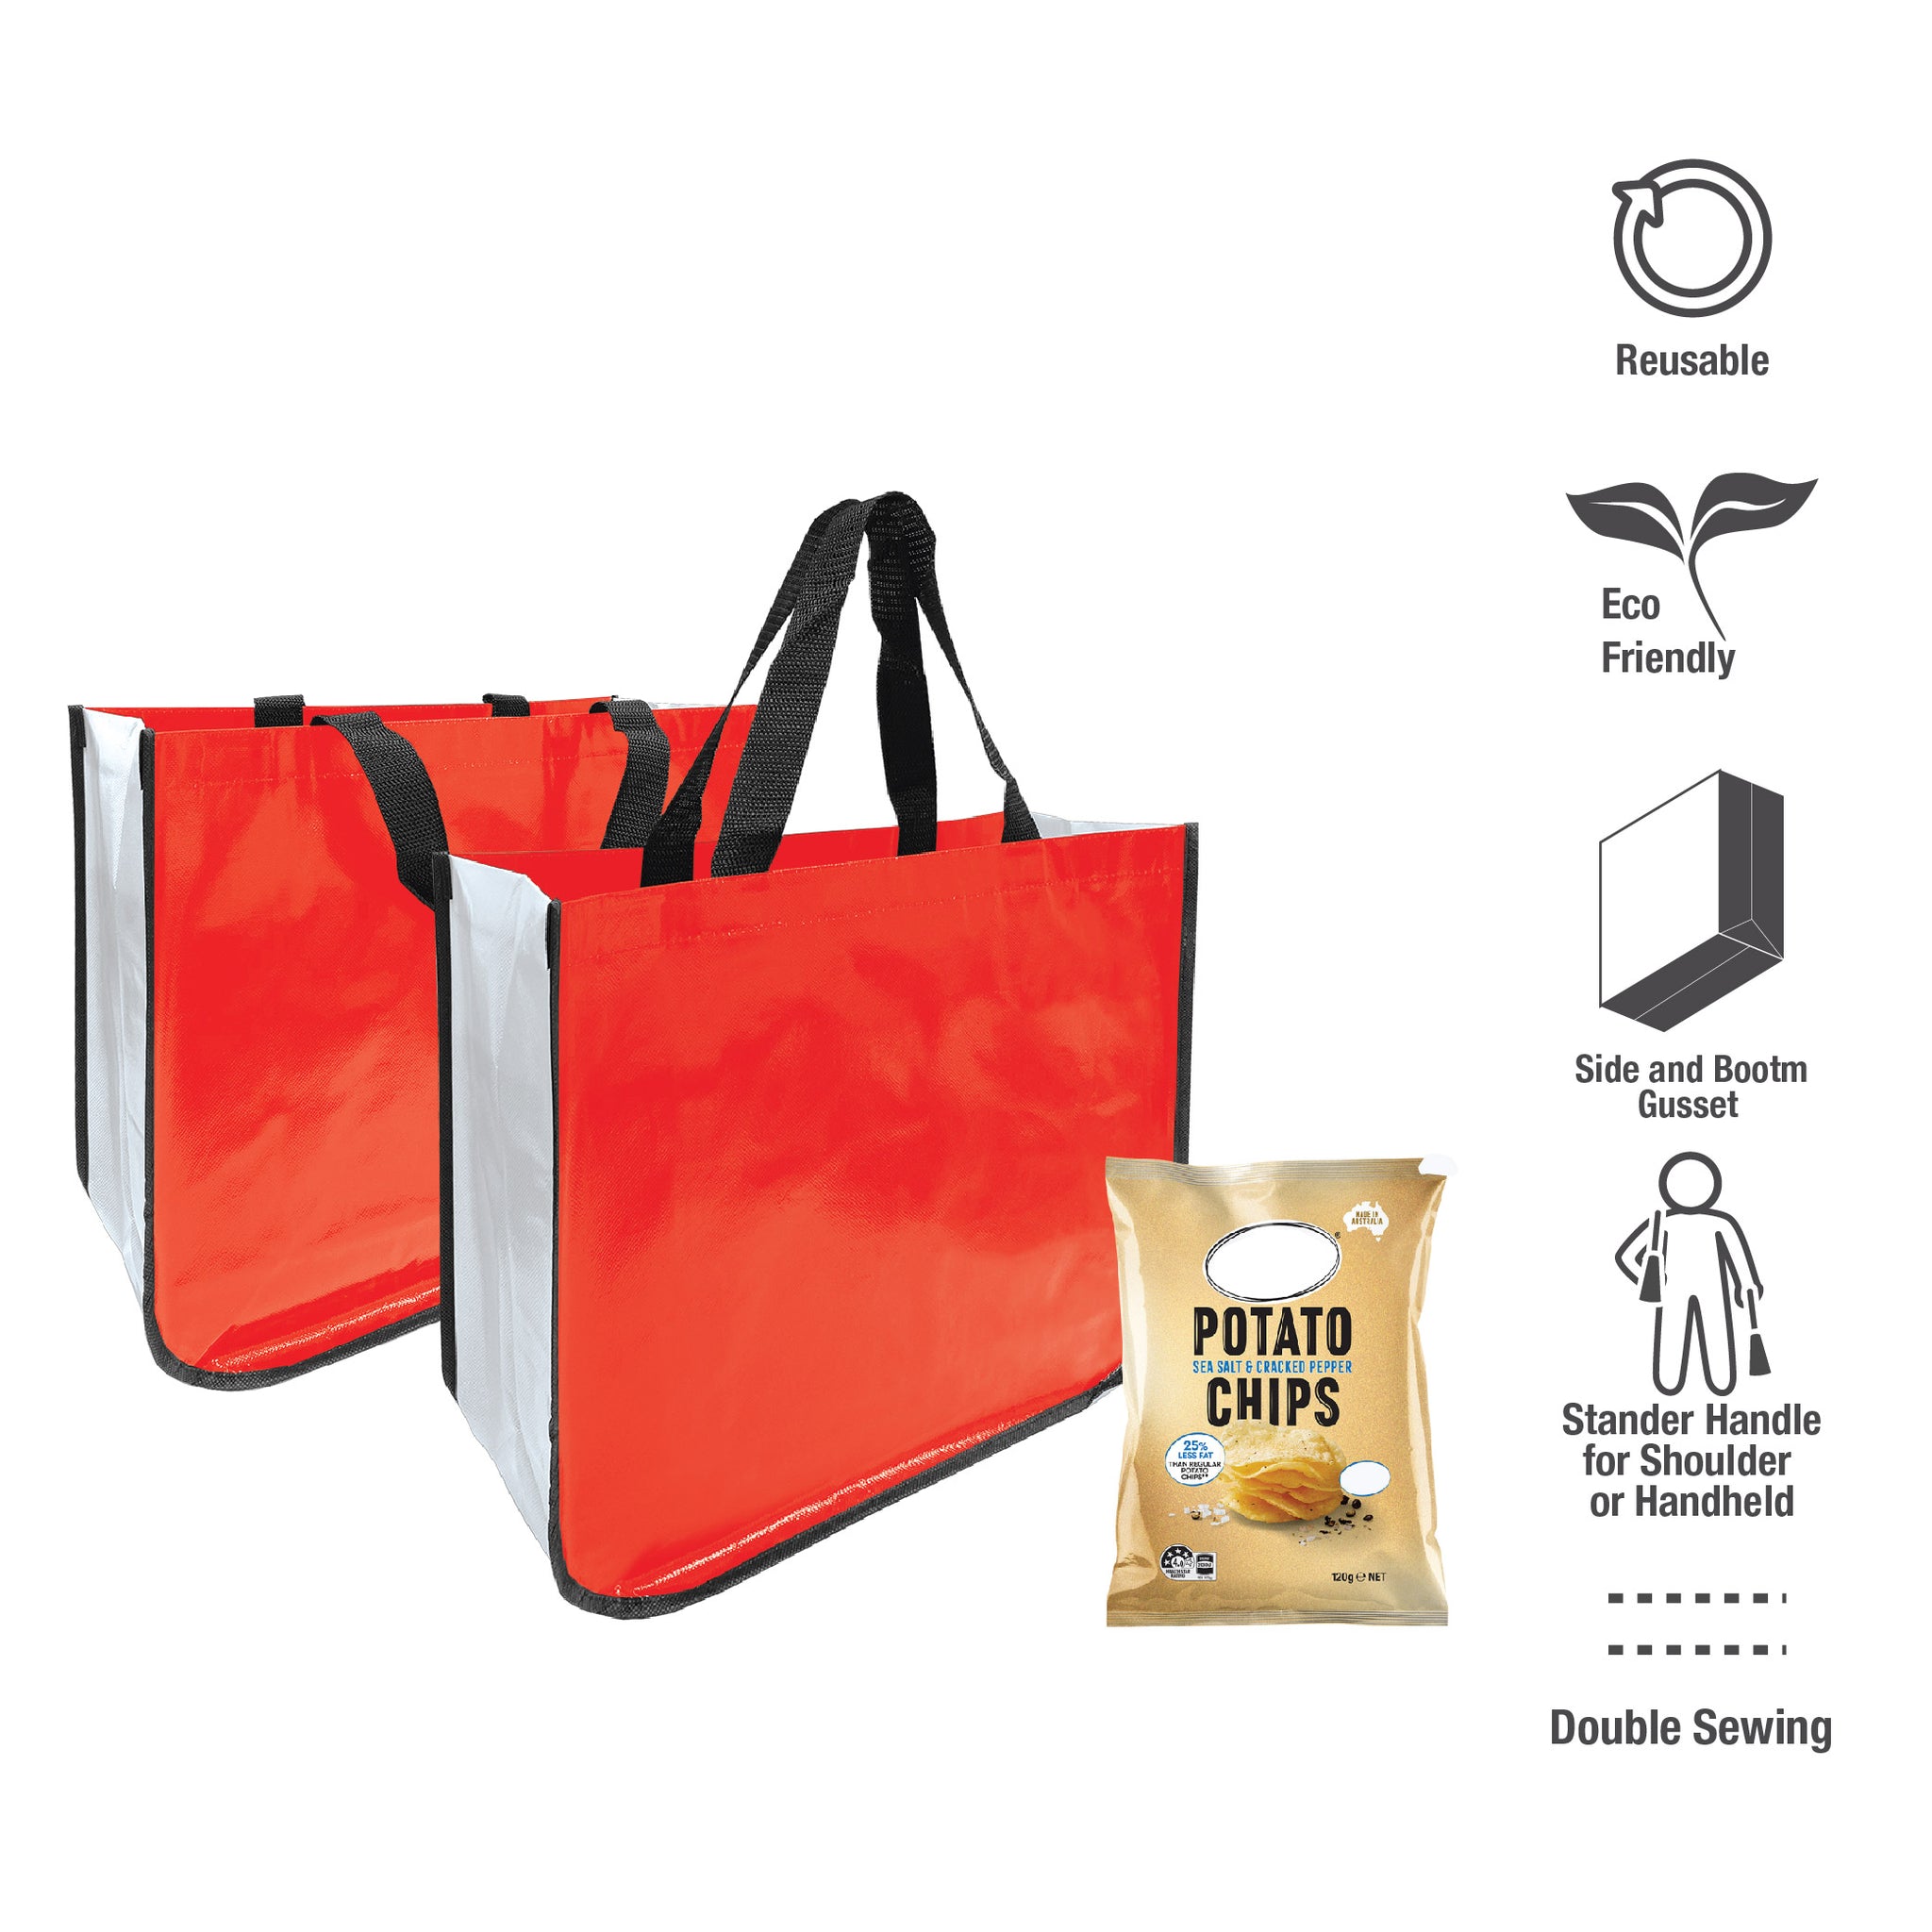 Two non-woven red shopping bags with black handles, ready to be filled with purchases. 